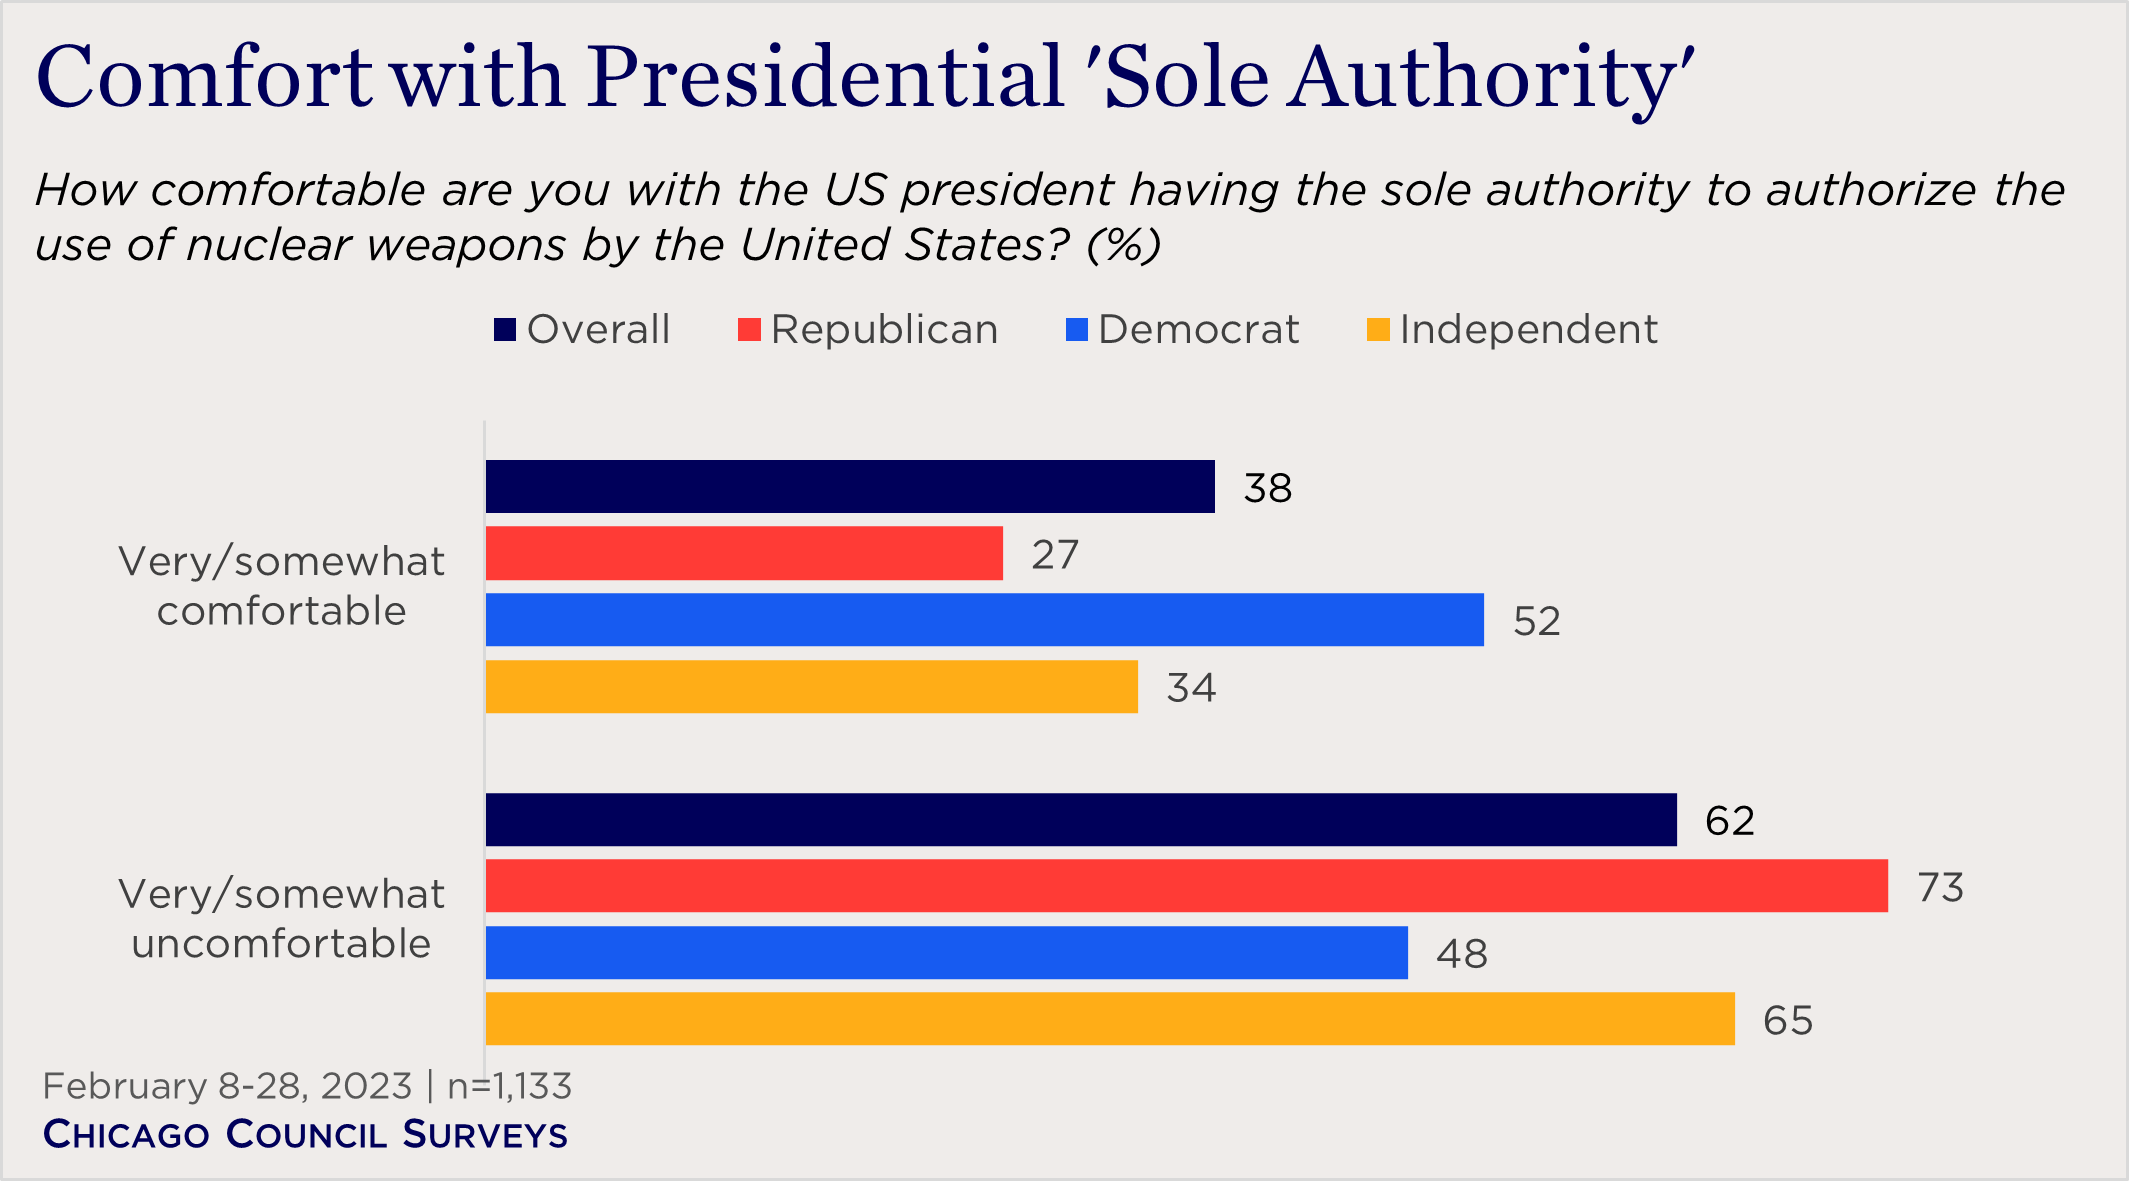 "bar chart showing comfort with presidential sole authority by party"